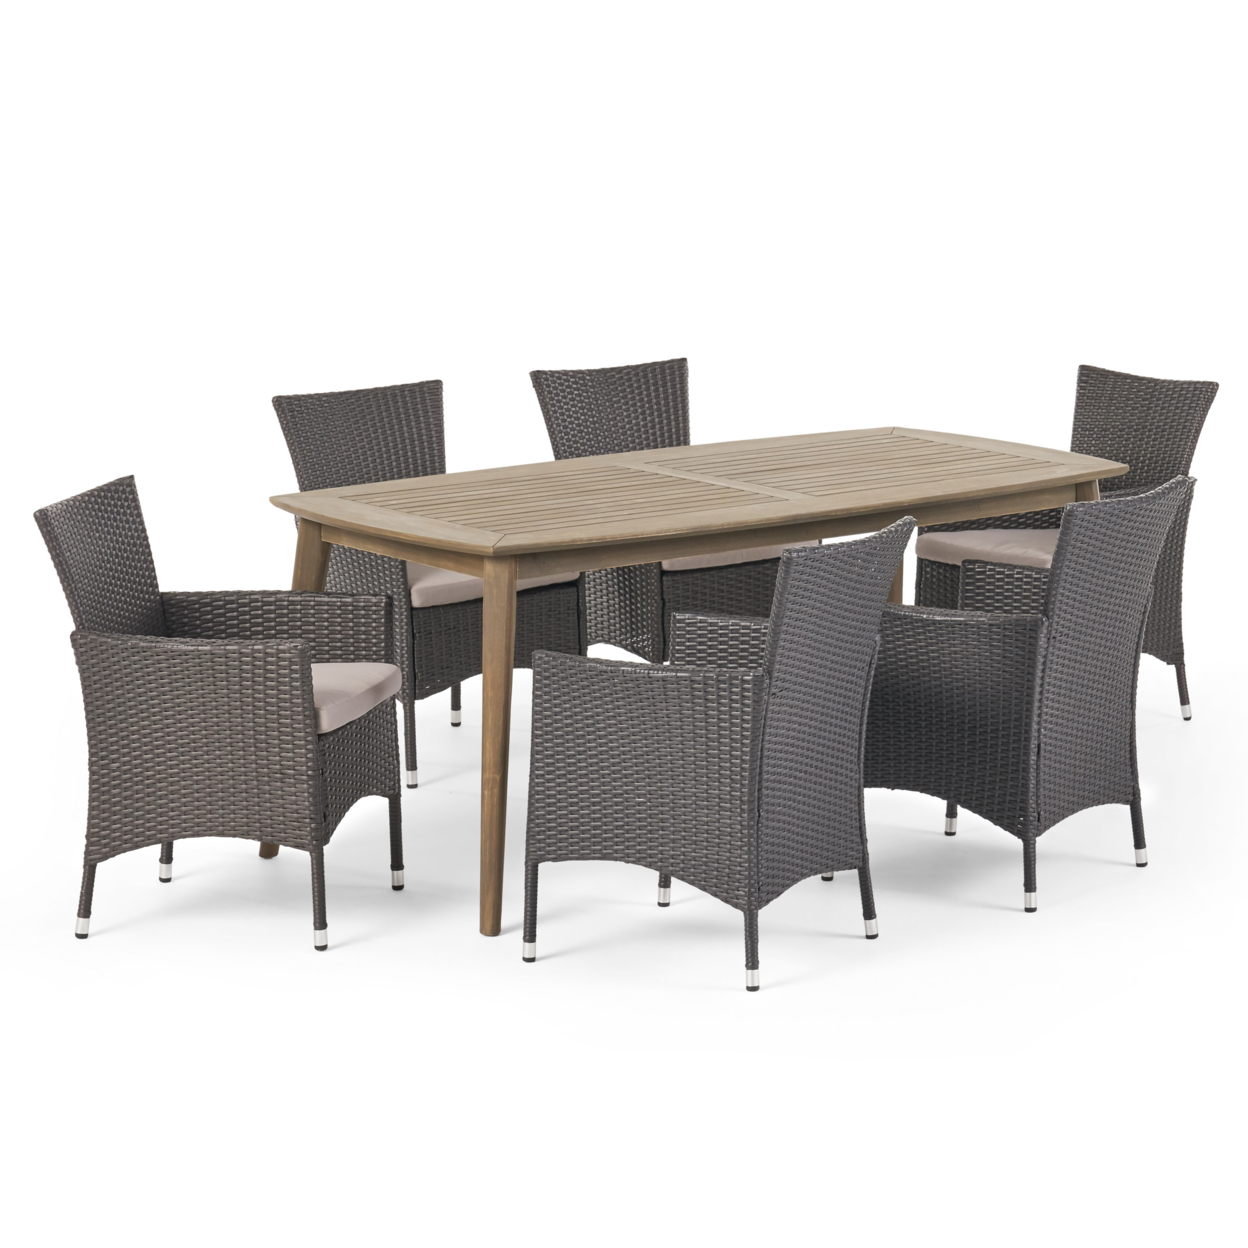 Jerzie Outdoor 7 Piece Wood And Wicker Dining Set, Gray And Gray